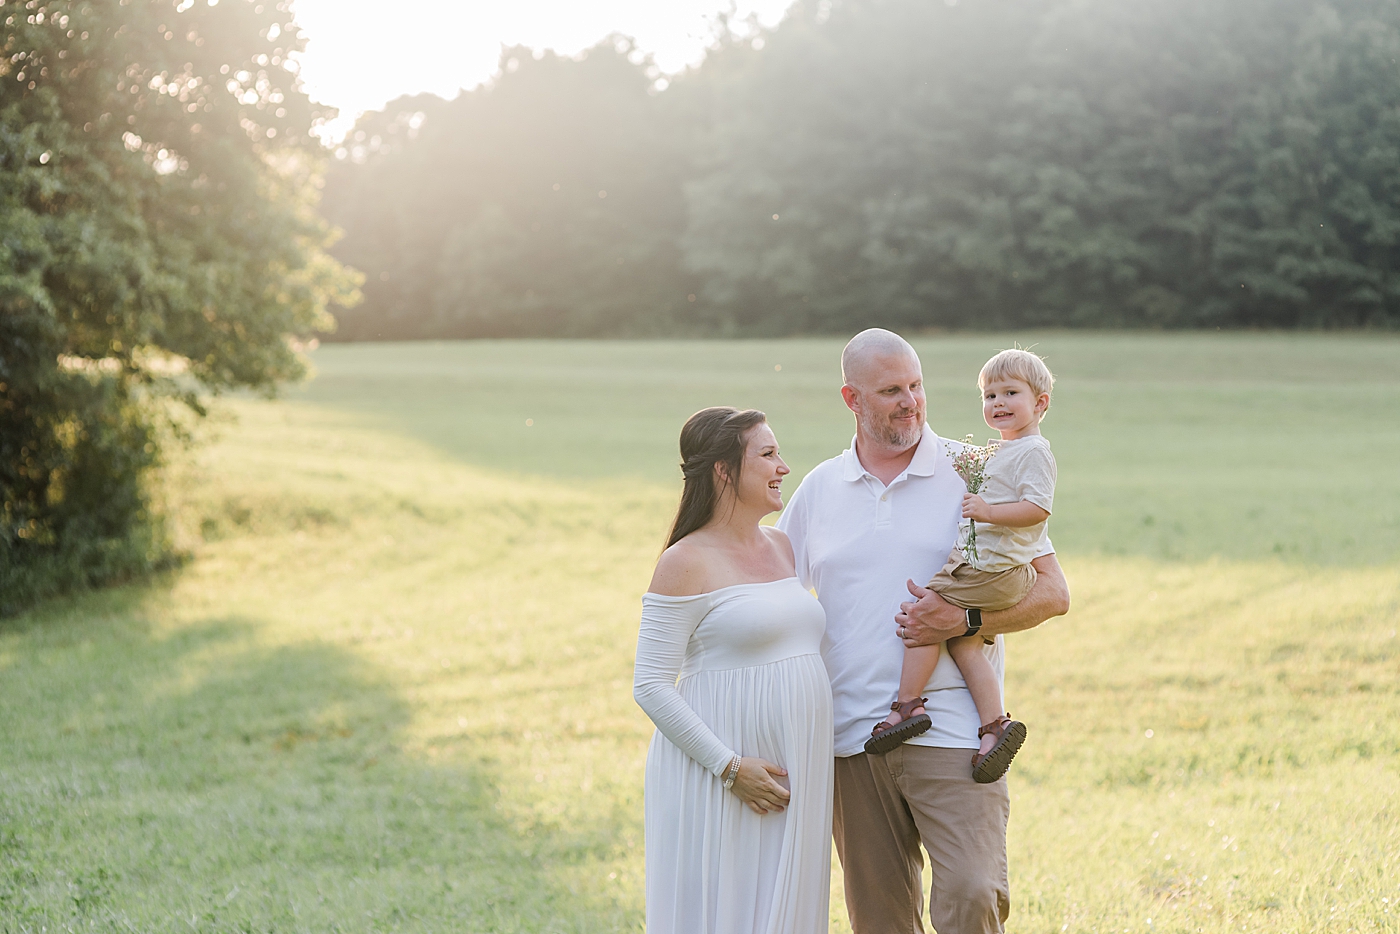 Mom, dad, and little boy interacting | Photo by Denver NC Maternity Photographer Anna Wisjo